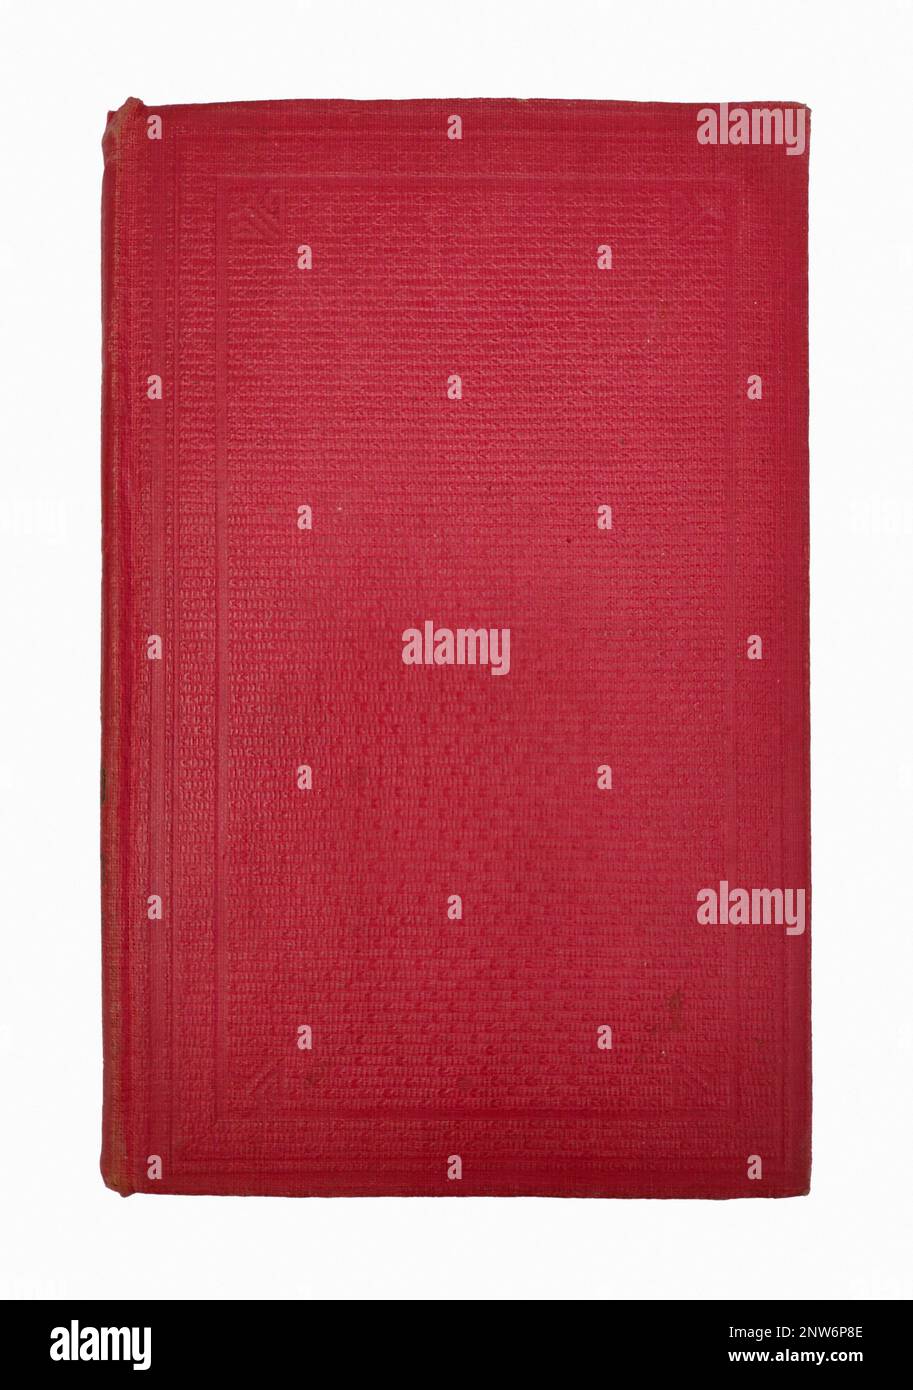 Old red book without shadow isolated on white background. Stock Photo